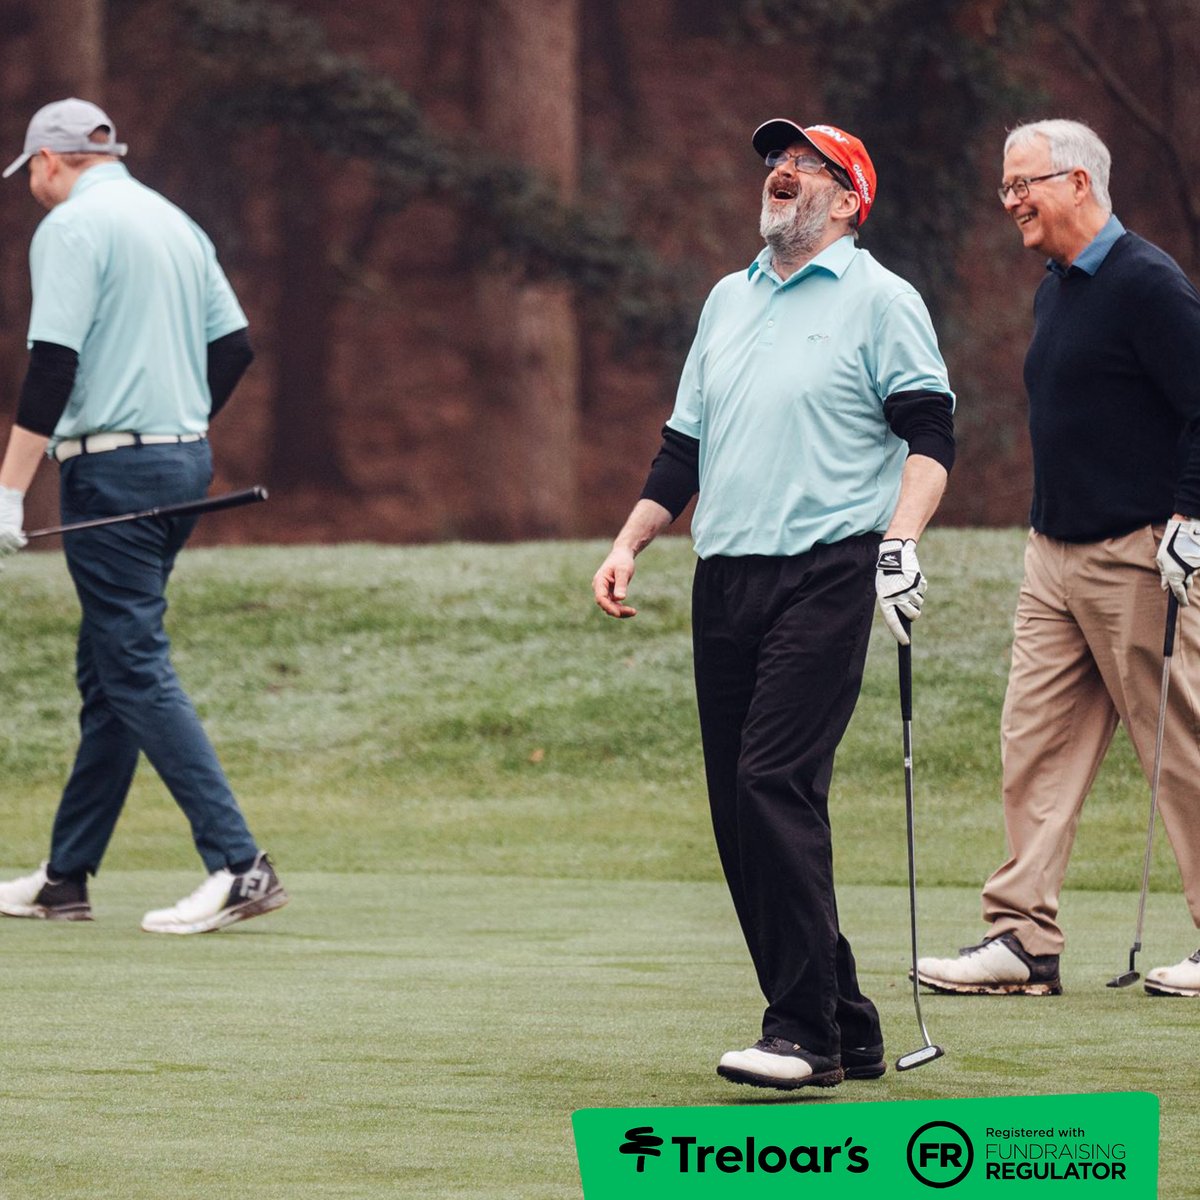 Get ready for a day of fun and giving back - our Charity Golf Day is next month!⛳🏌️‍♂️ On Wednesday 5 June we will be returning to Old Thorns for another unforgettable event! Secure your spot now - treloar.org.uk/events/the-tre… #Golf #GolfDay #HampshireGolf #SurreyGolf #CharityEvent